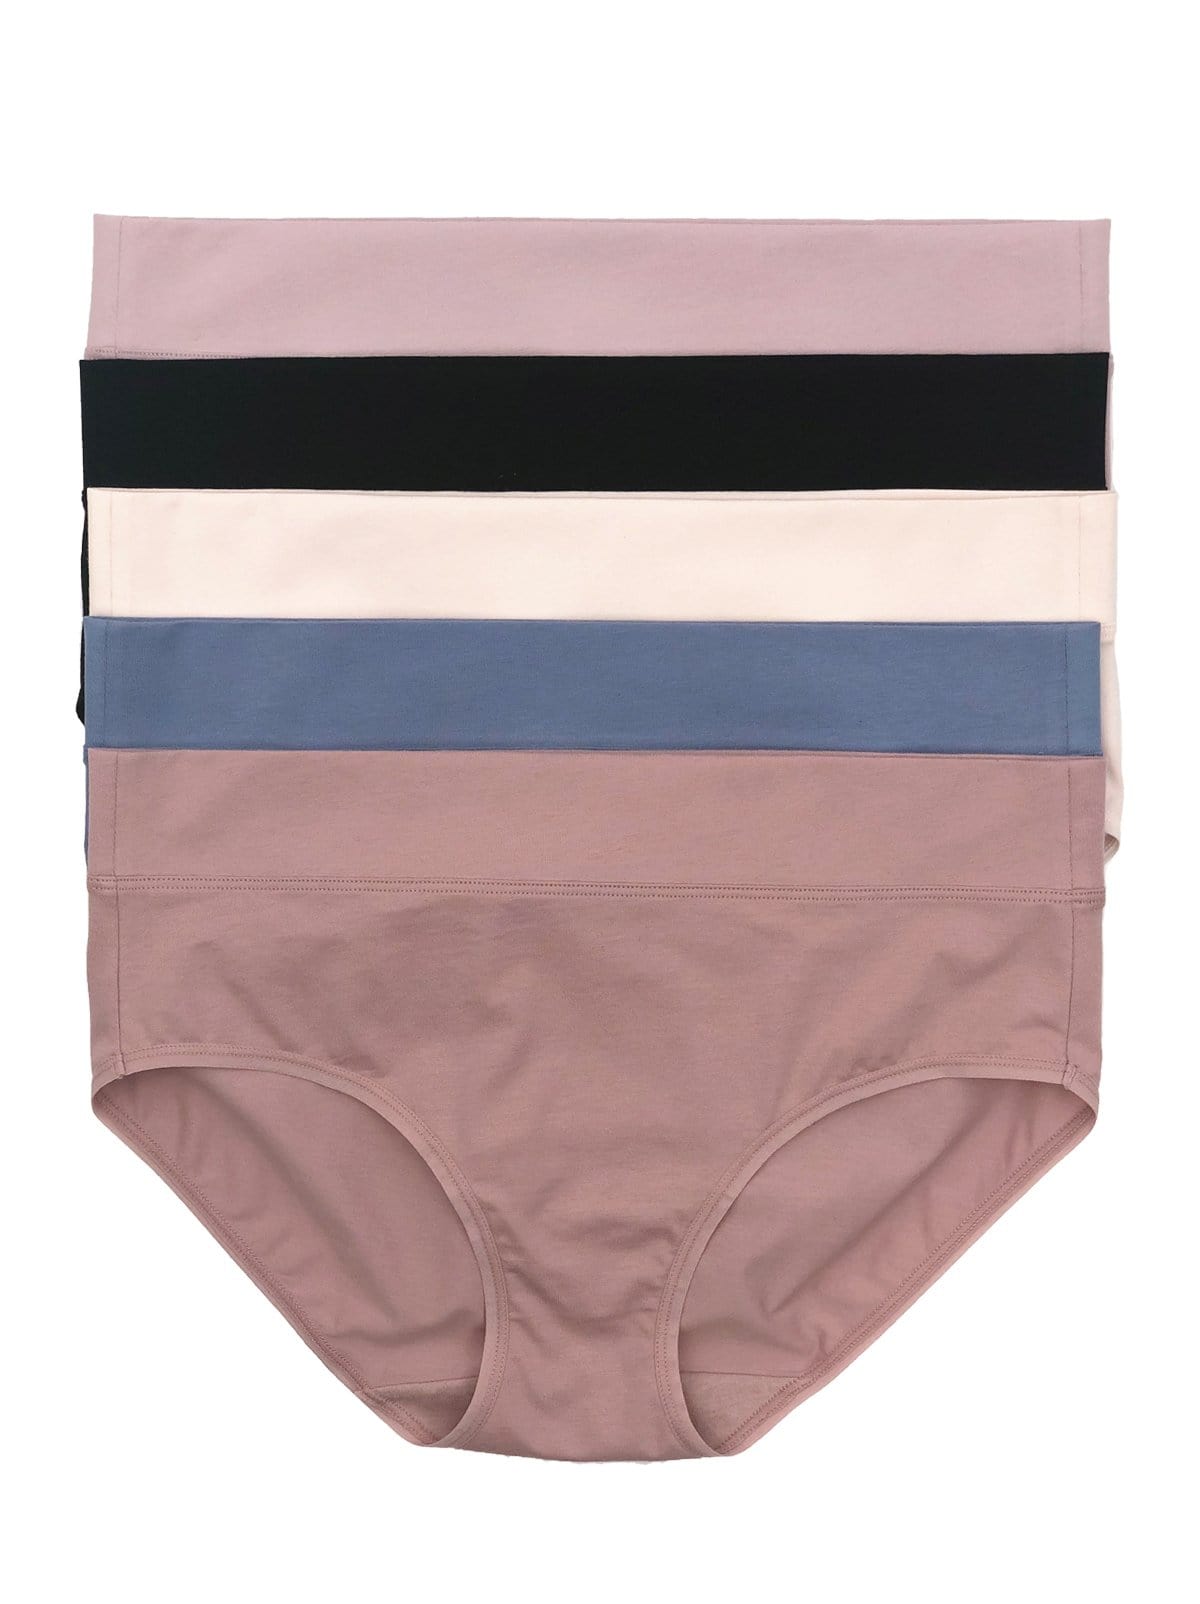 Pima Cotton Hipster Panty 5-Pack